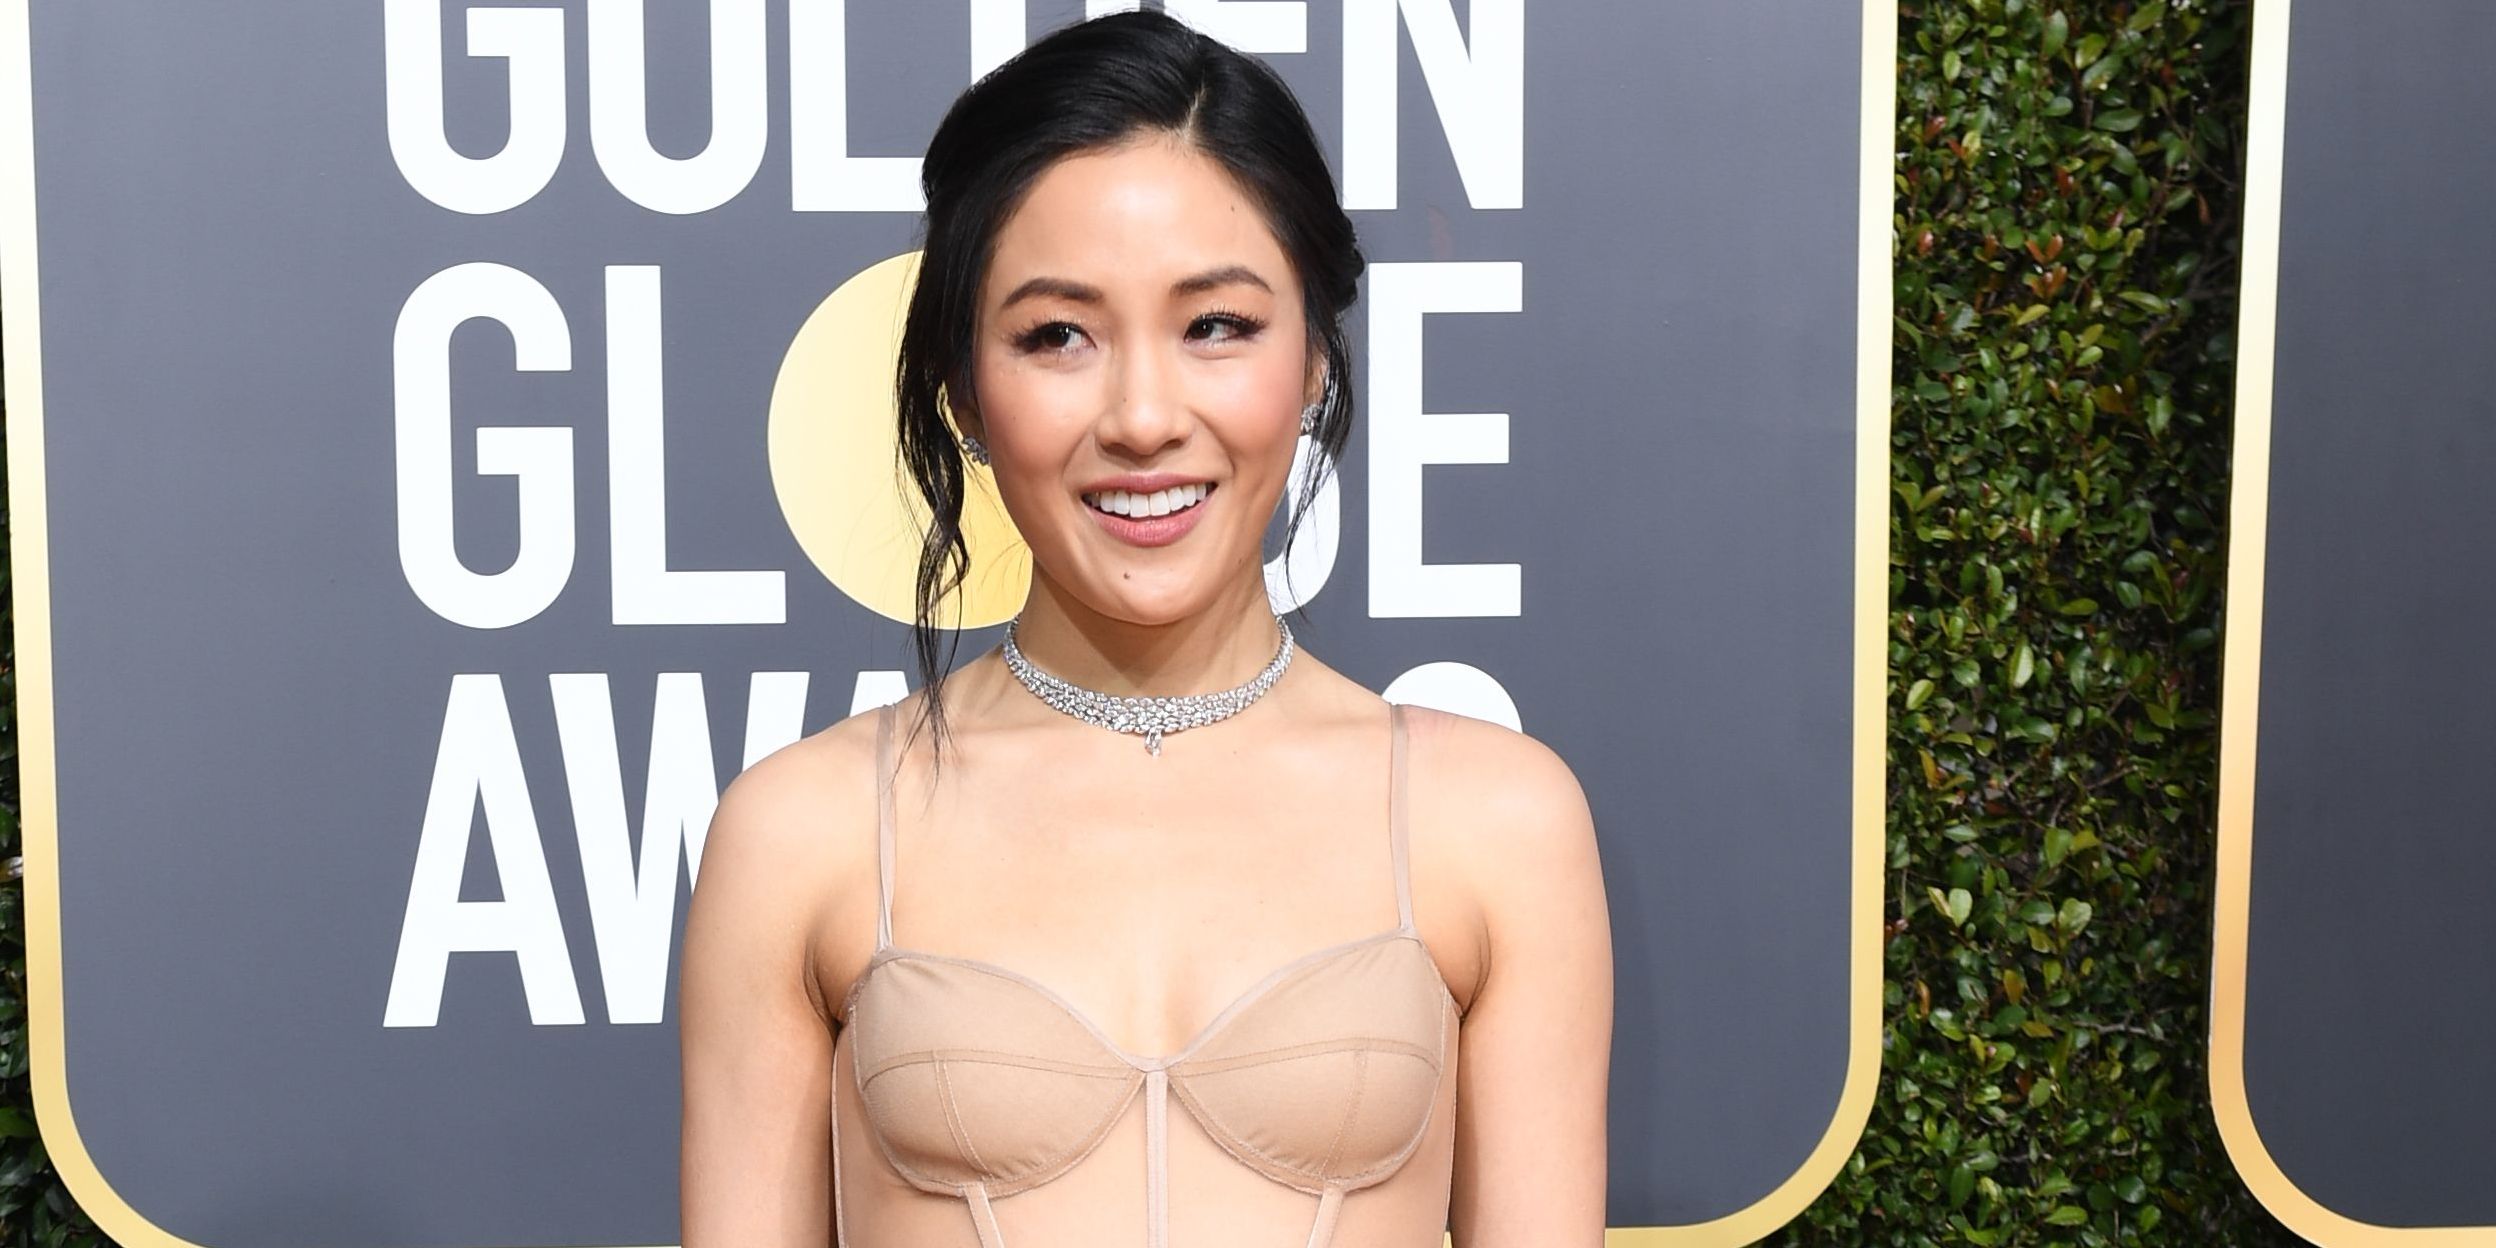 claire wrenn recommends constance wu tits pic